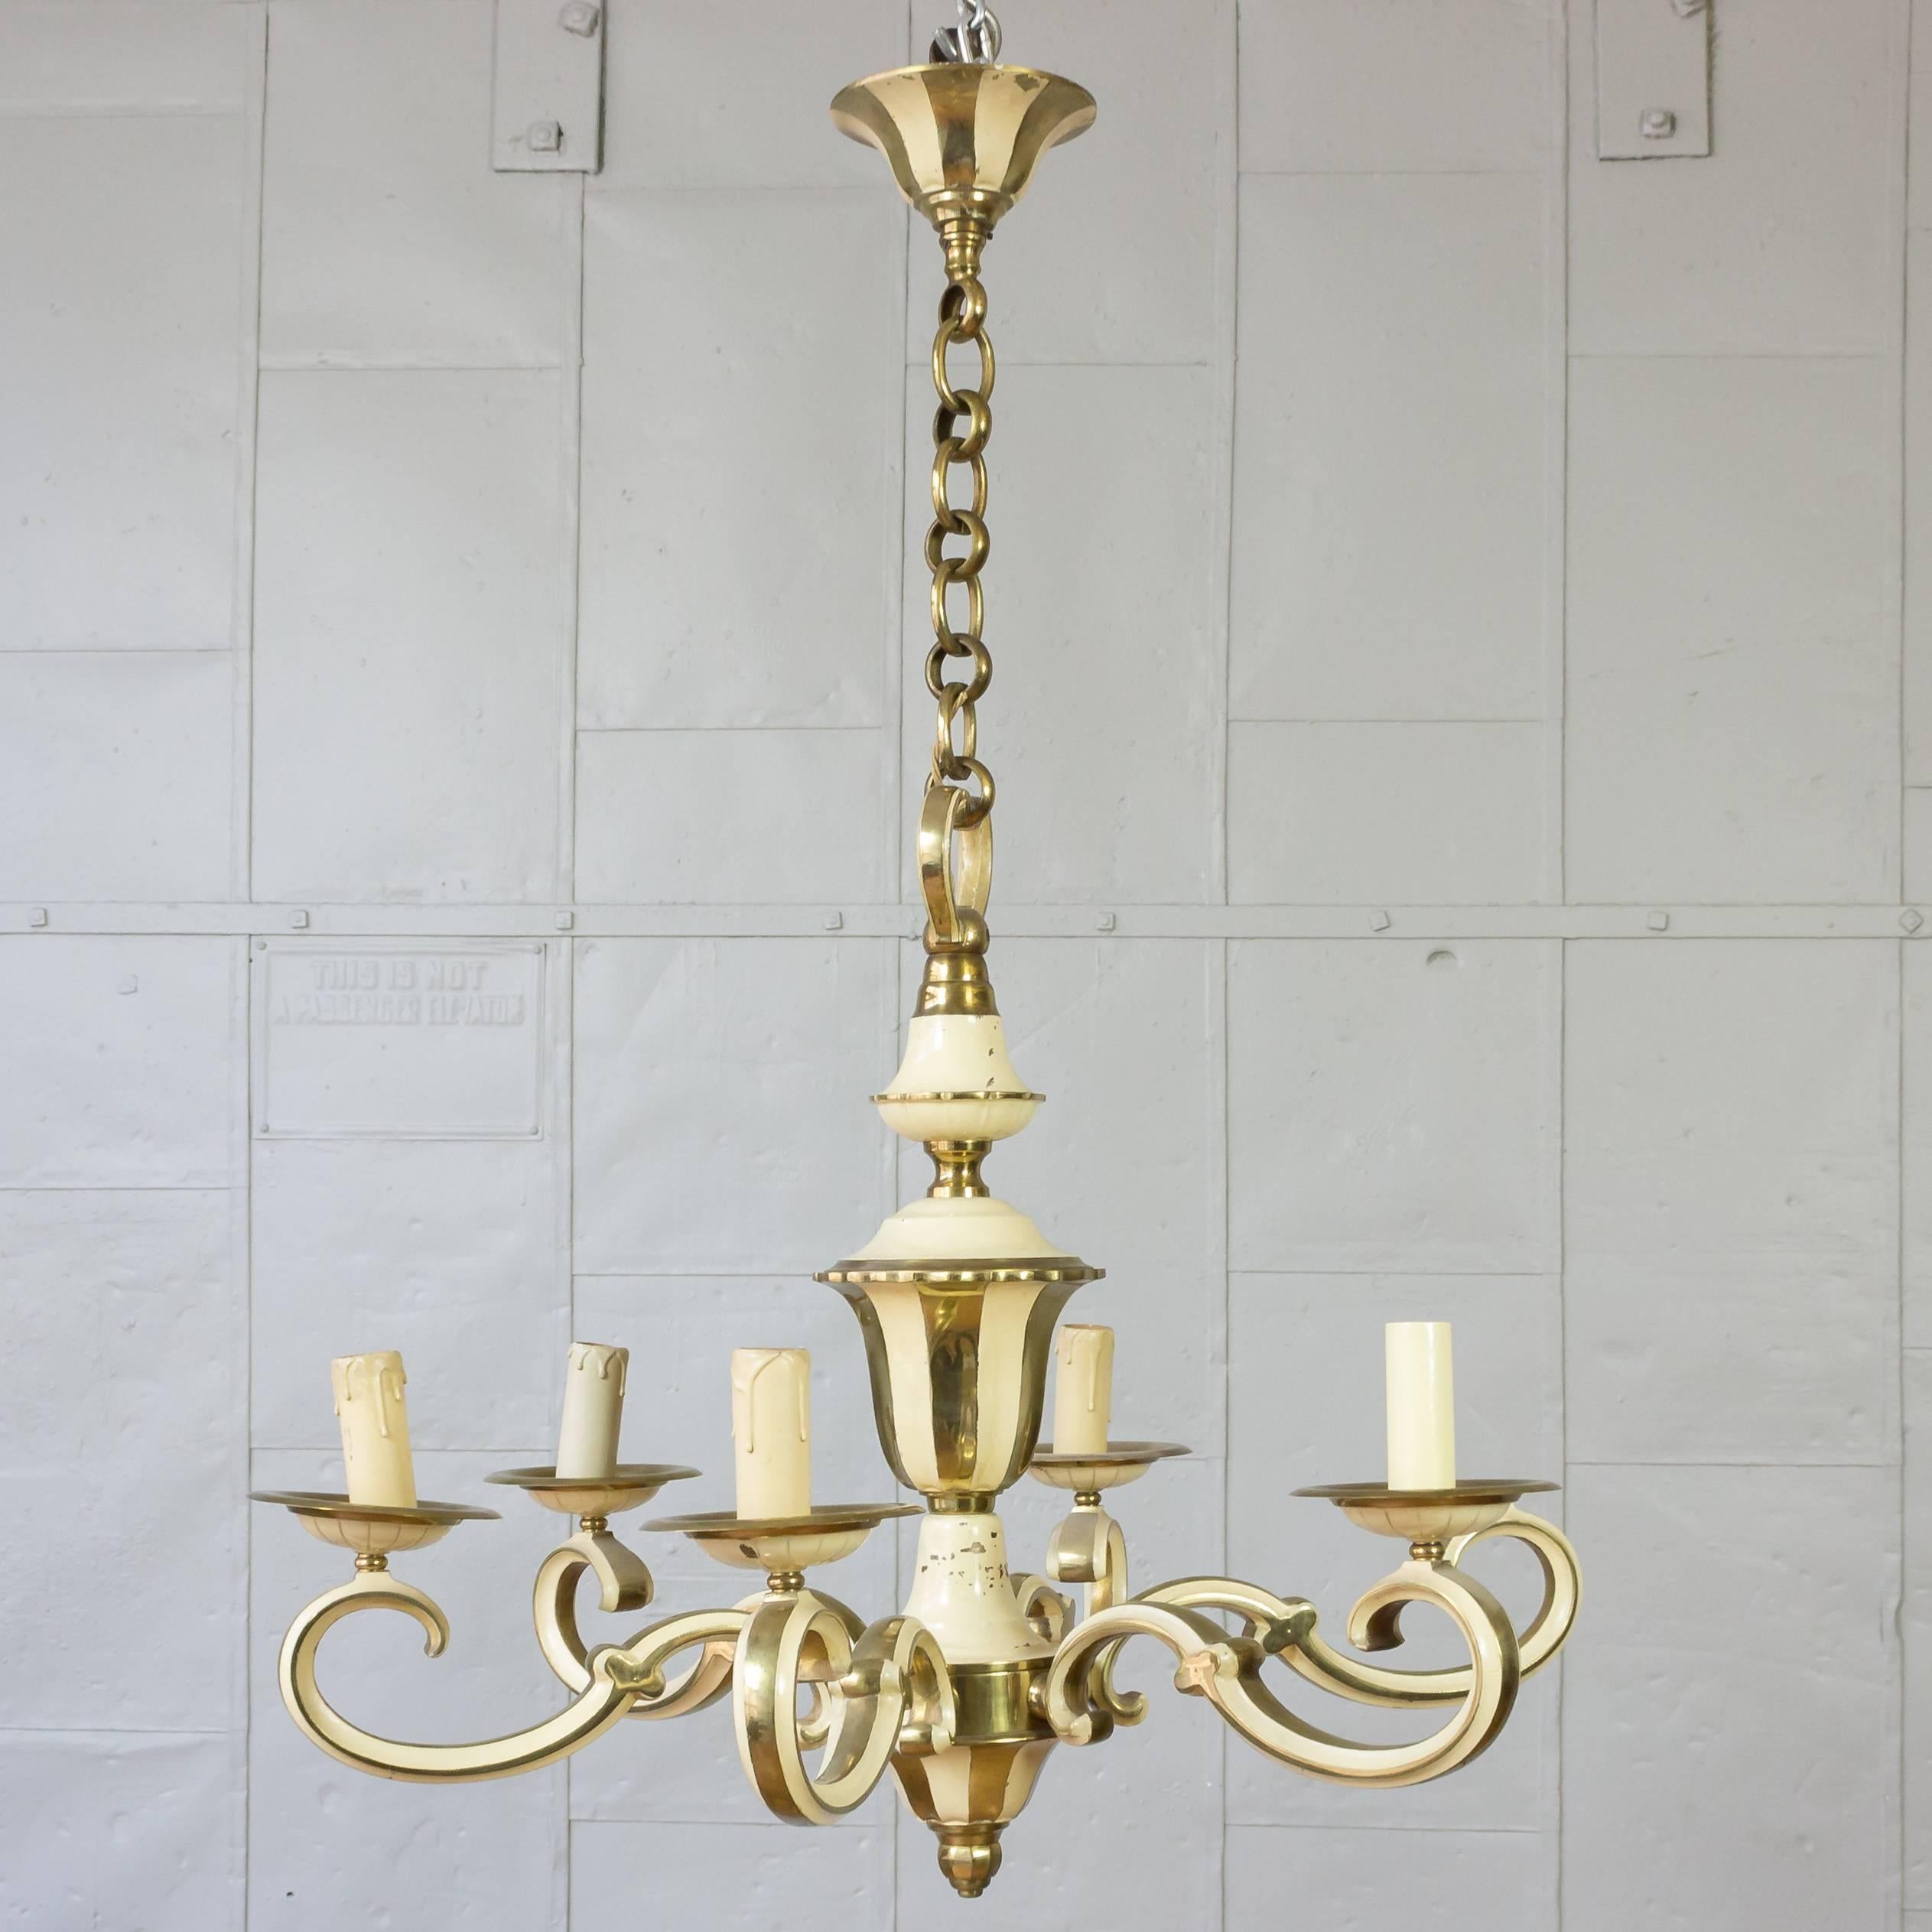 Six-arm brass and enamel chandelier with matching canopy.

Sold in vintage condition.